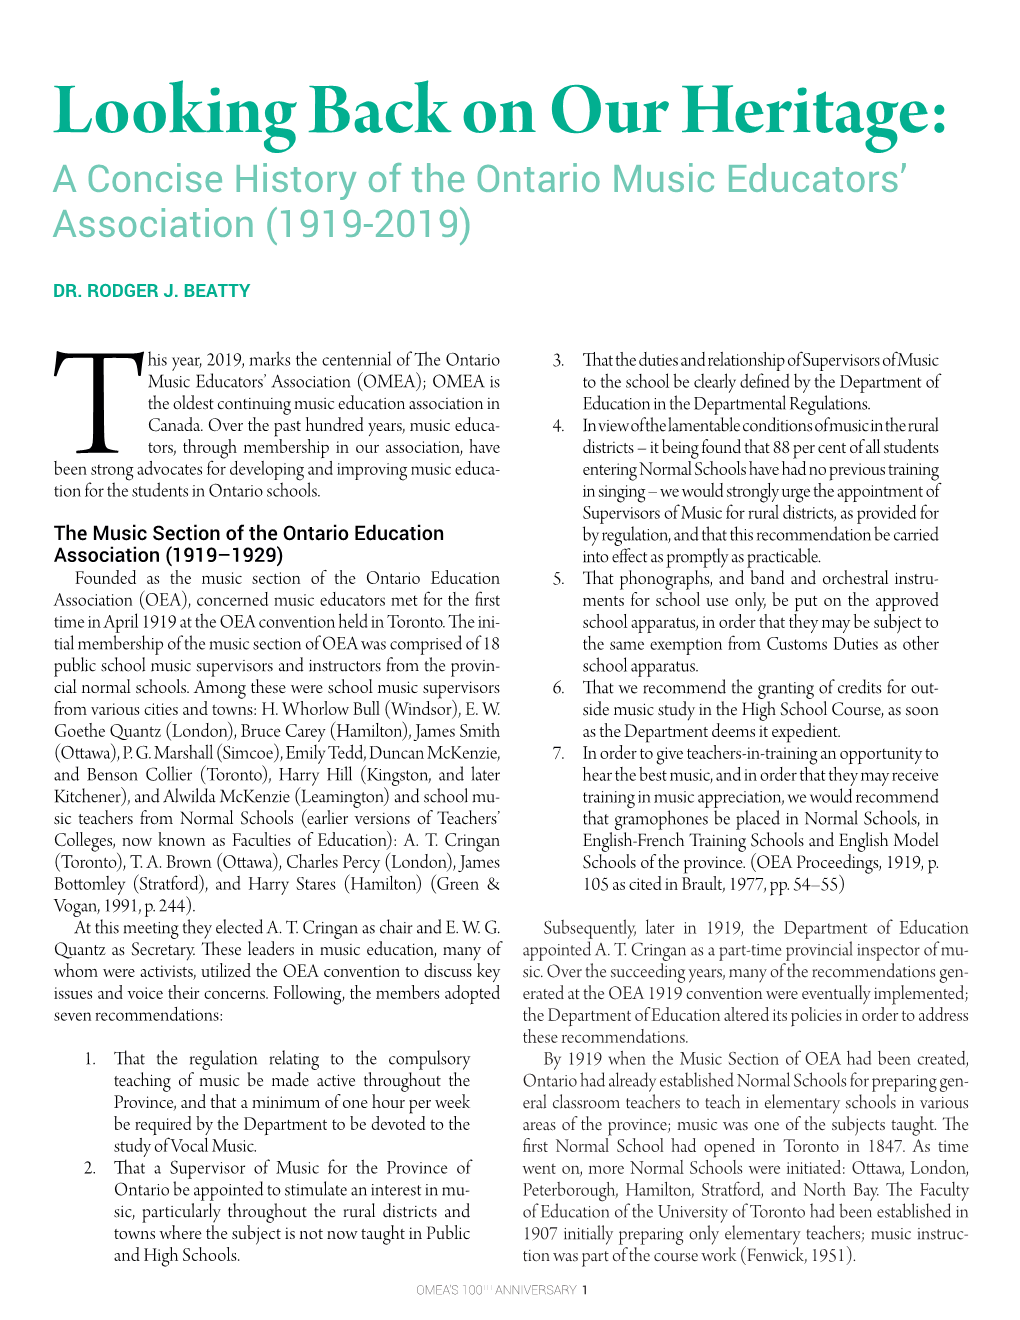 Looking Back on Our Heritage: a Concise History of the Ontario Music Educators’ Association (1919-2019)